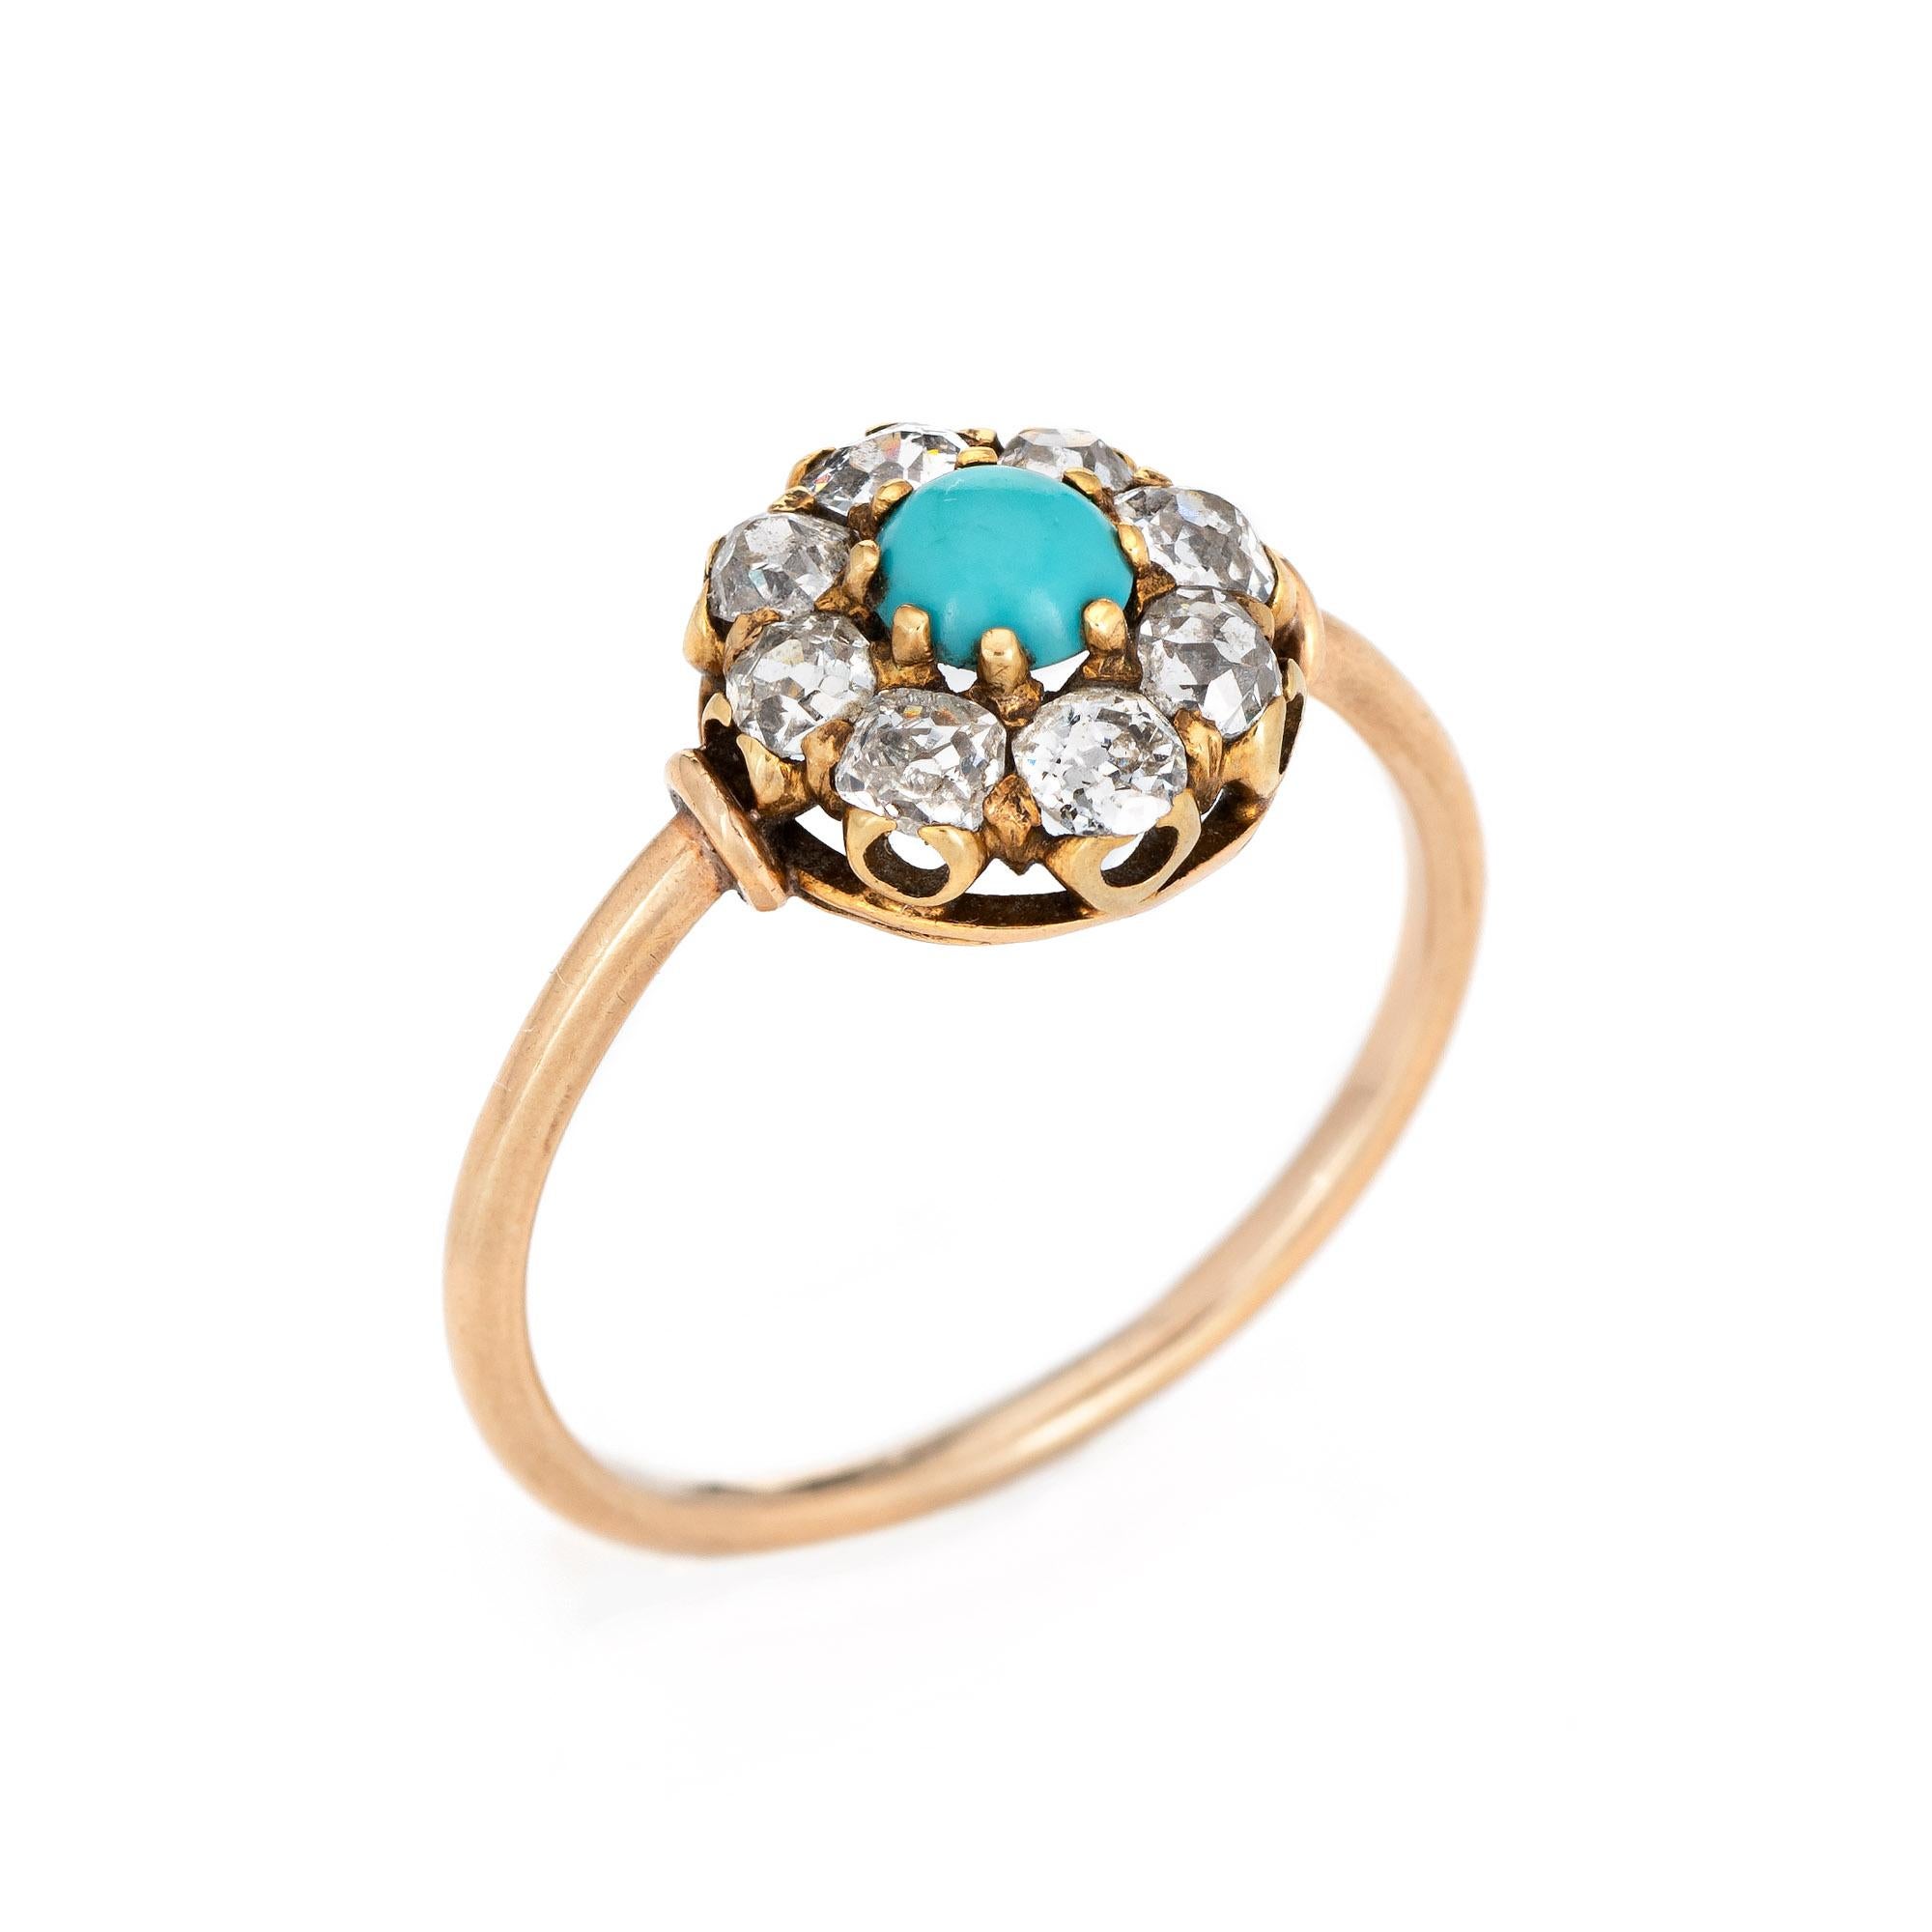 Finely detailed antique Edwardian turquoise & diamond ring (circa 1900s to 1910s), crafted in 14k yellow gold. 

Cabochon cut turquoise measures 4.25mm. Eight old mine cut diamonds are estimated at 0.10 carats each and total an estimated 0.80 carats